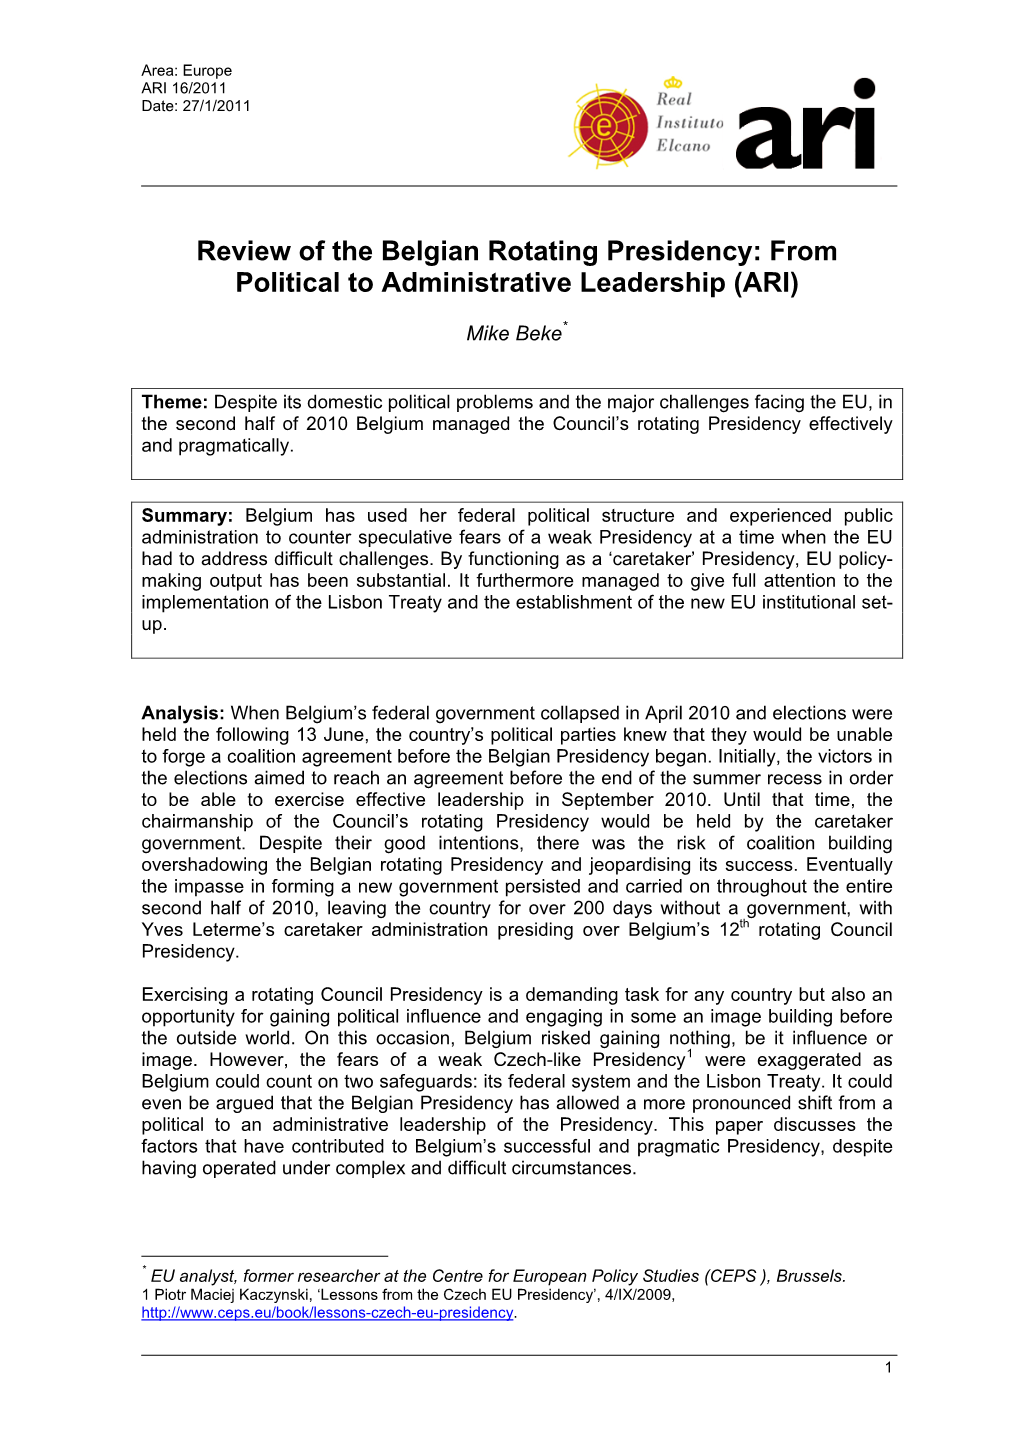 Review of the Belgian Rotating Presidency: from Political to Administrative Leadership (ARI)